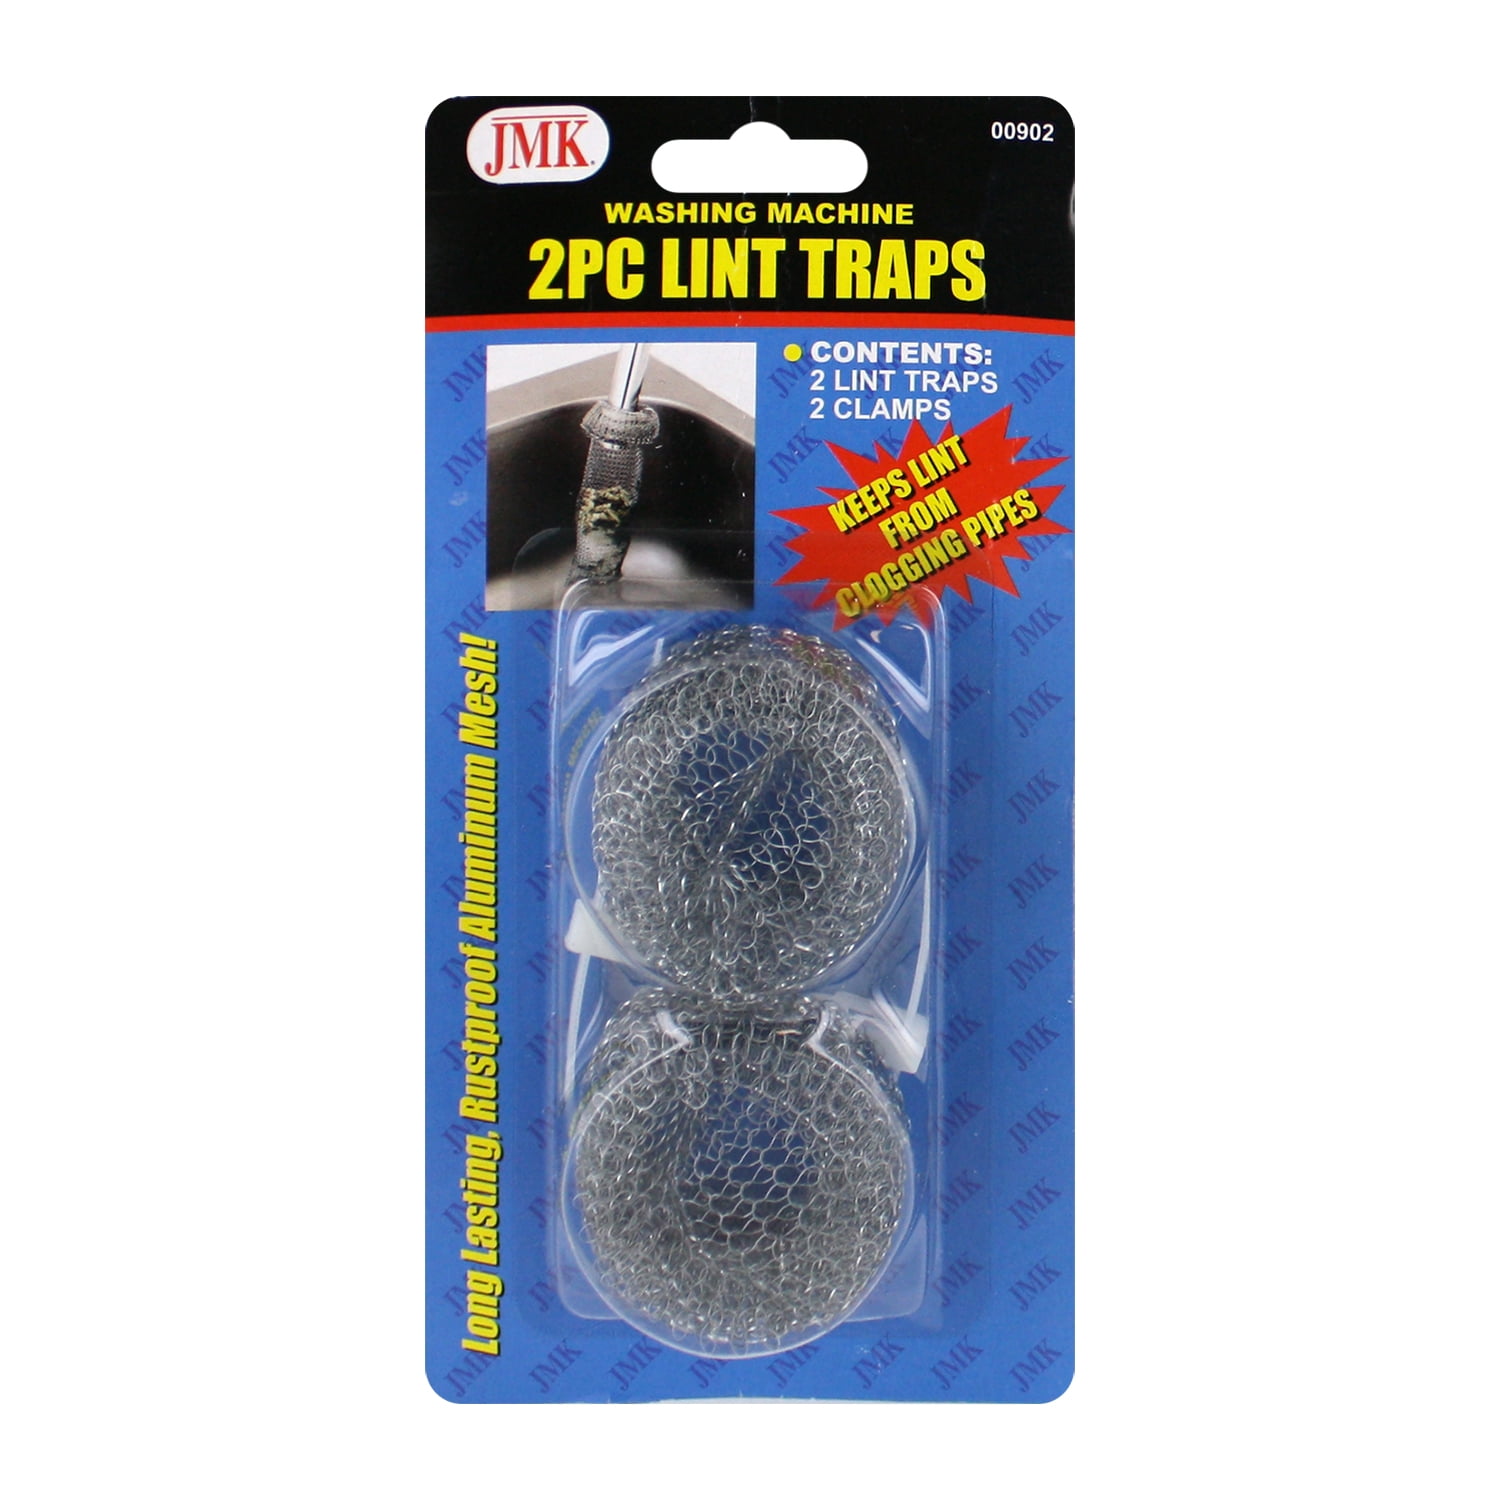 Helping Hand - Helping Hand, Lint Traps, Washing Machine (2 count